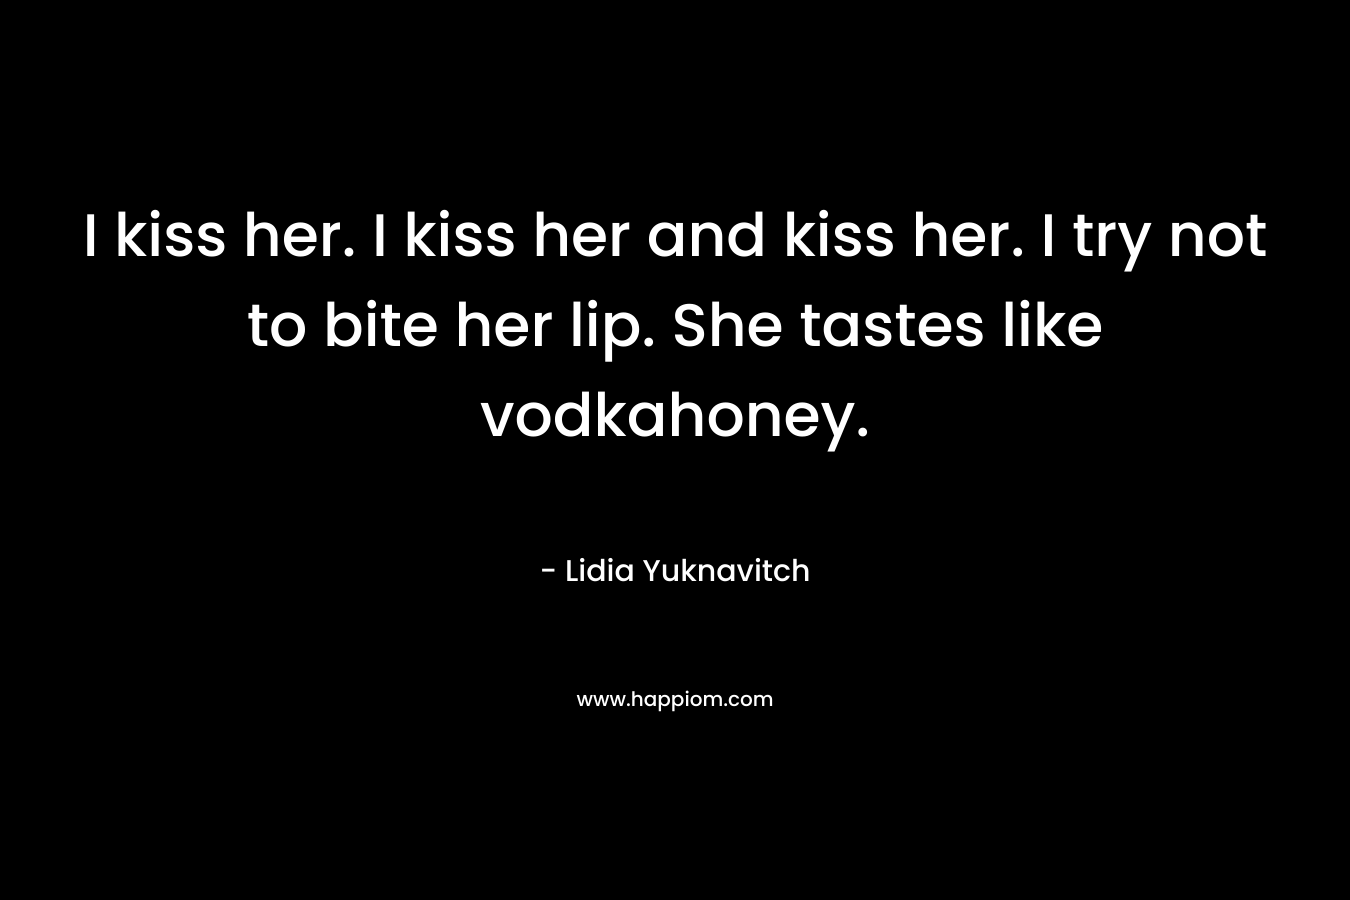 I kiss her. I kiss her and kiss her. I try not to bite her lip. She tastes like vodkahoney.